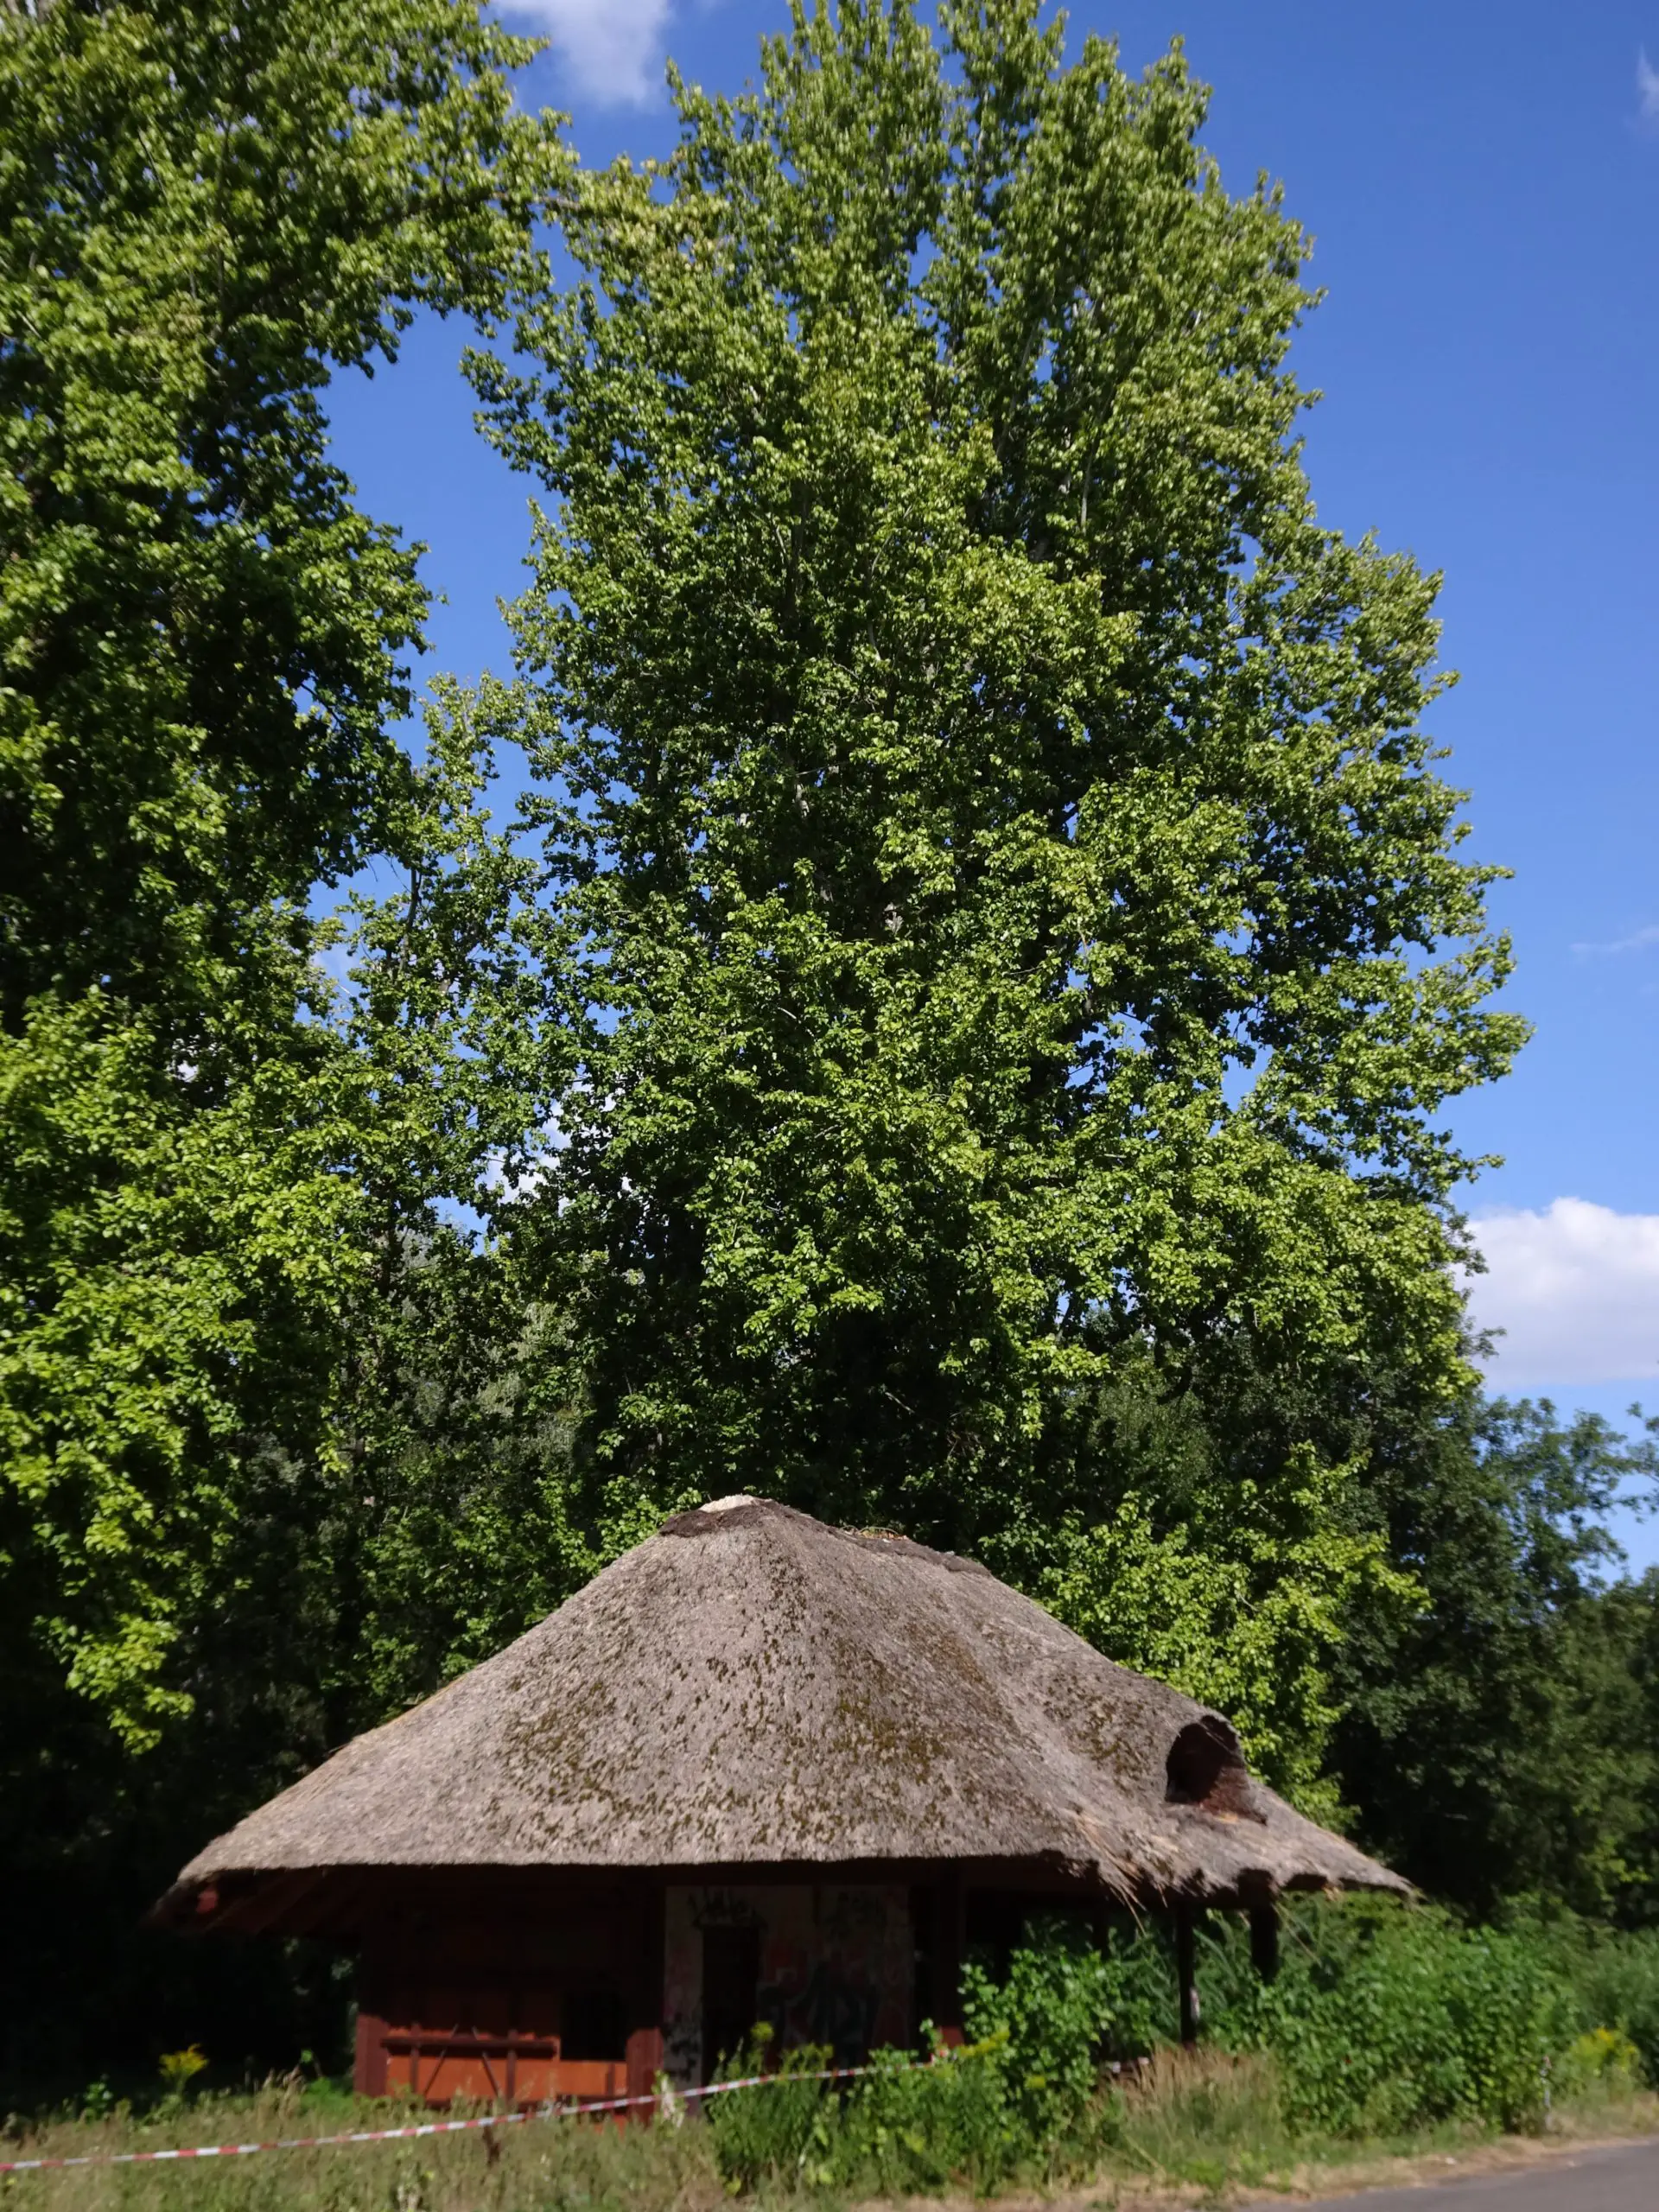 A small thatched-roof building in between trees